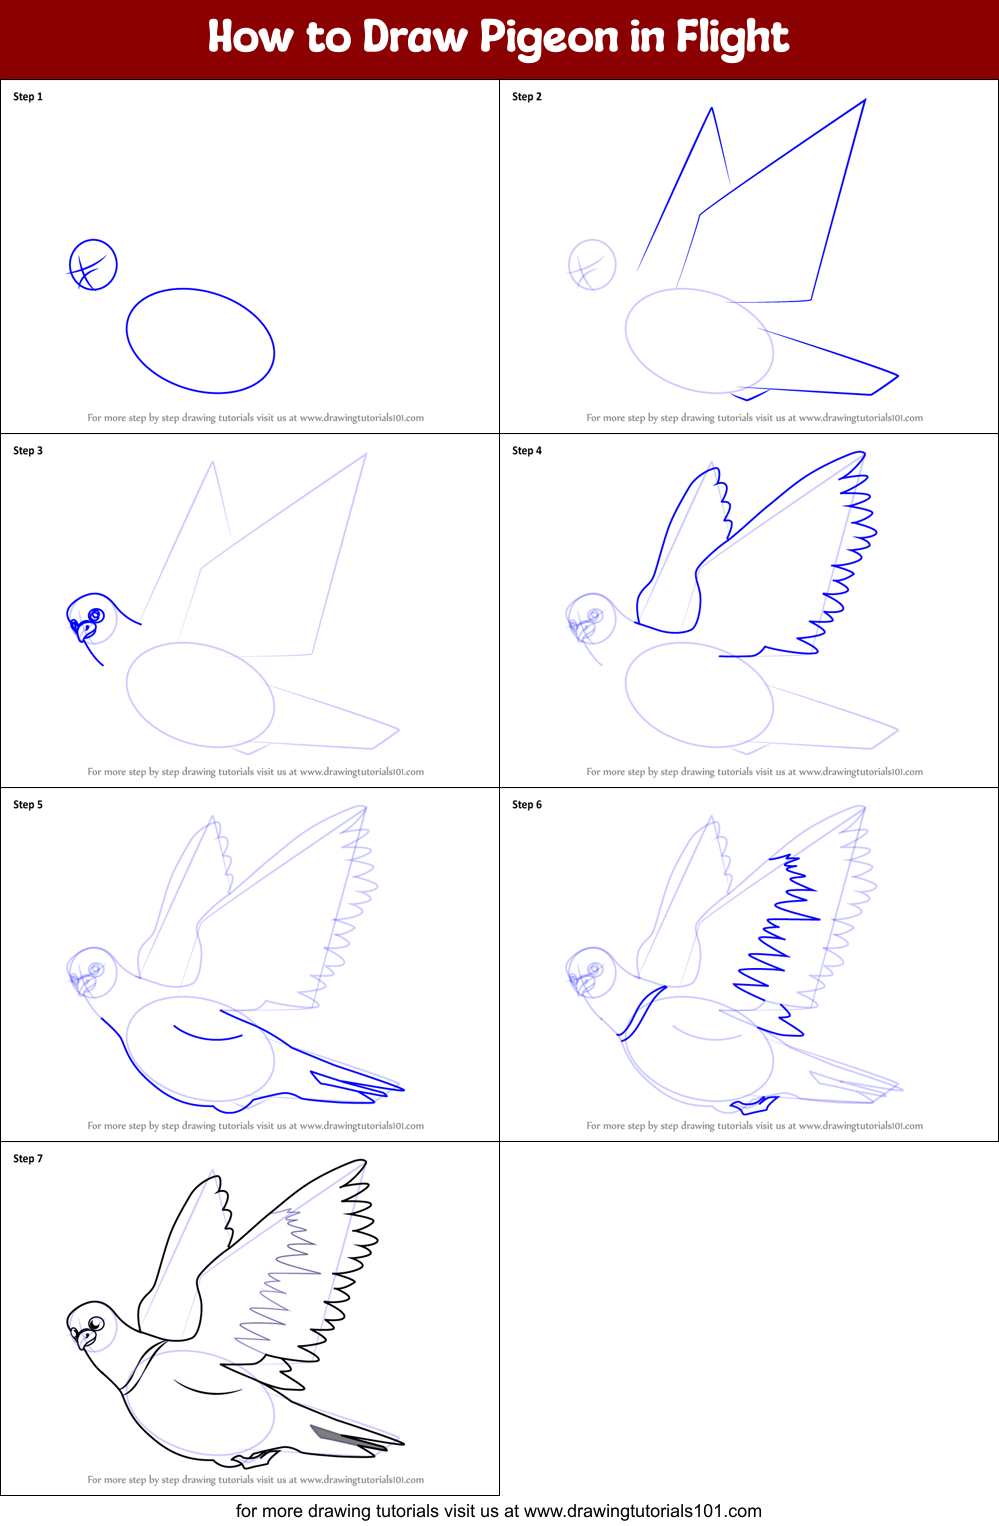 How to Draw Pigeon in Flight printable step by step drawing sheet